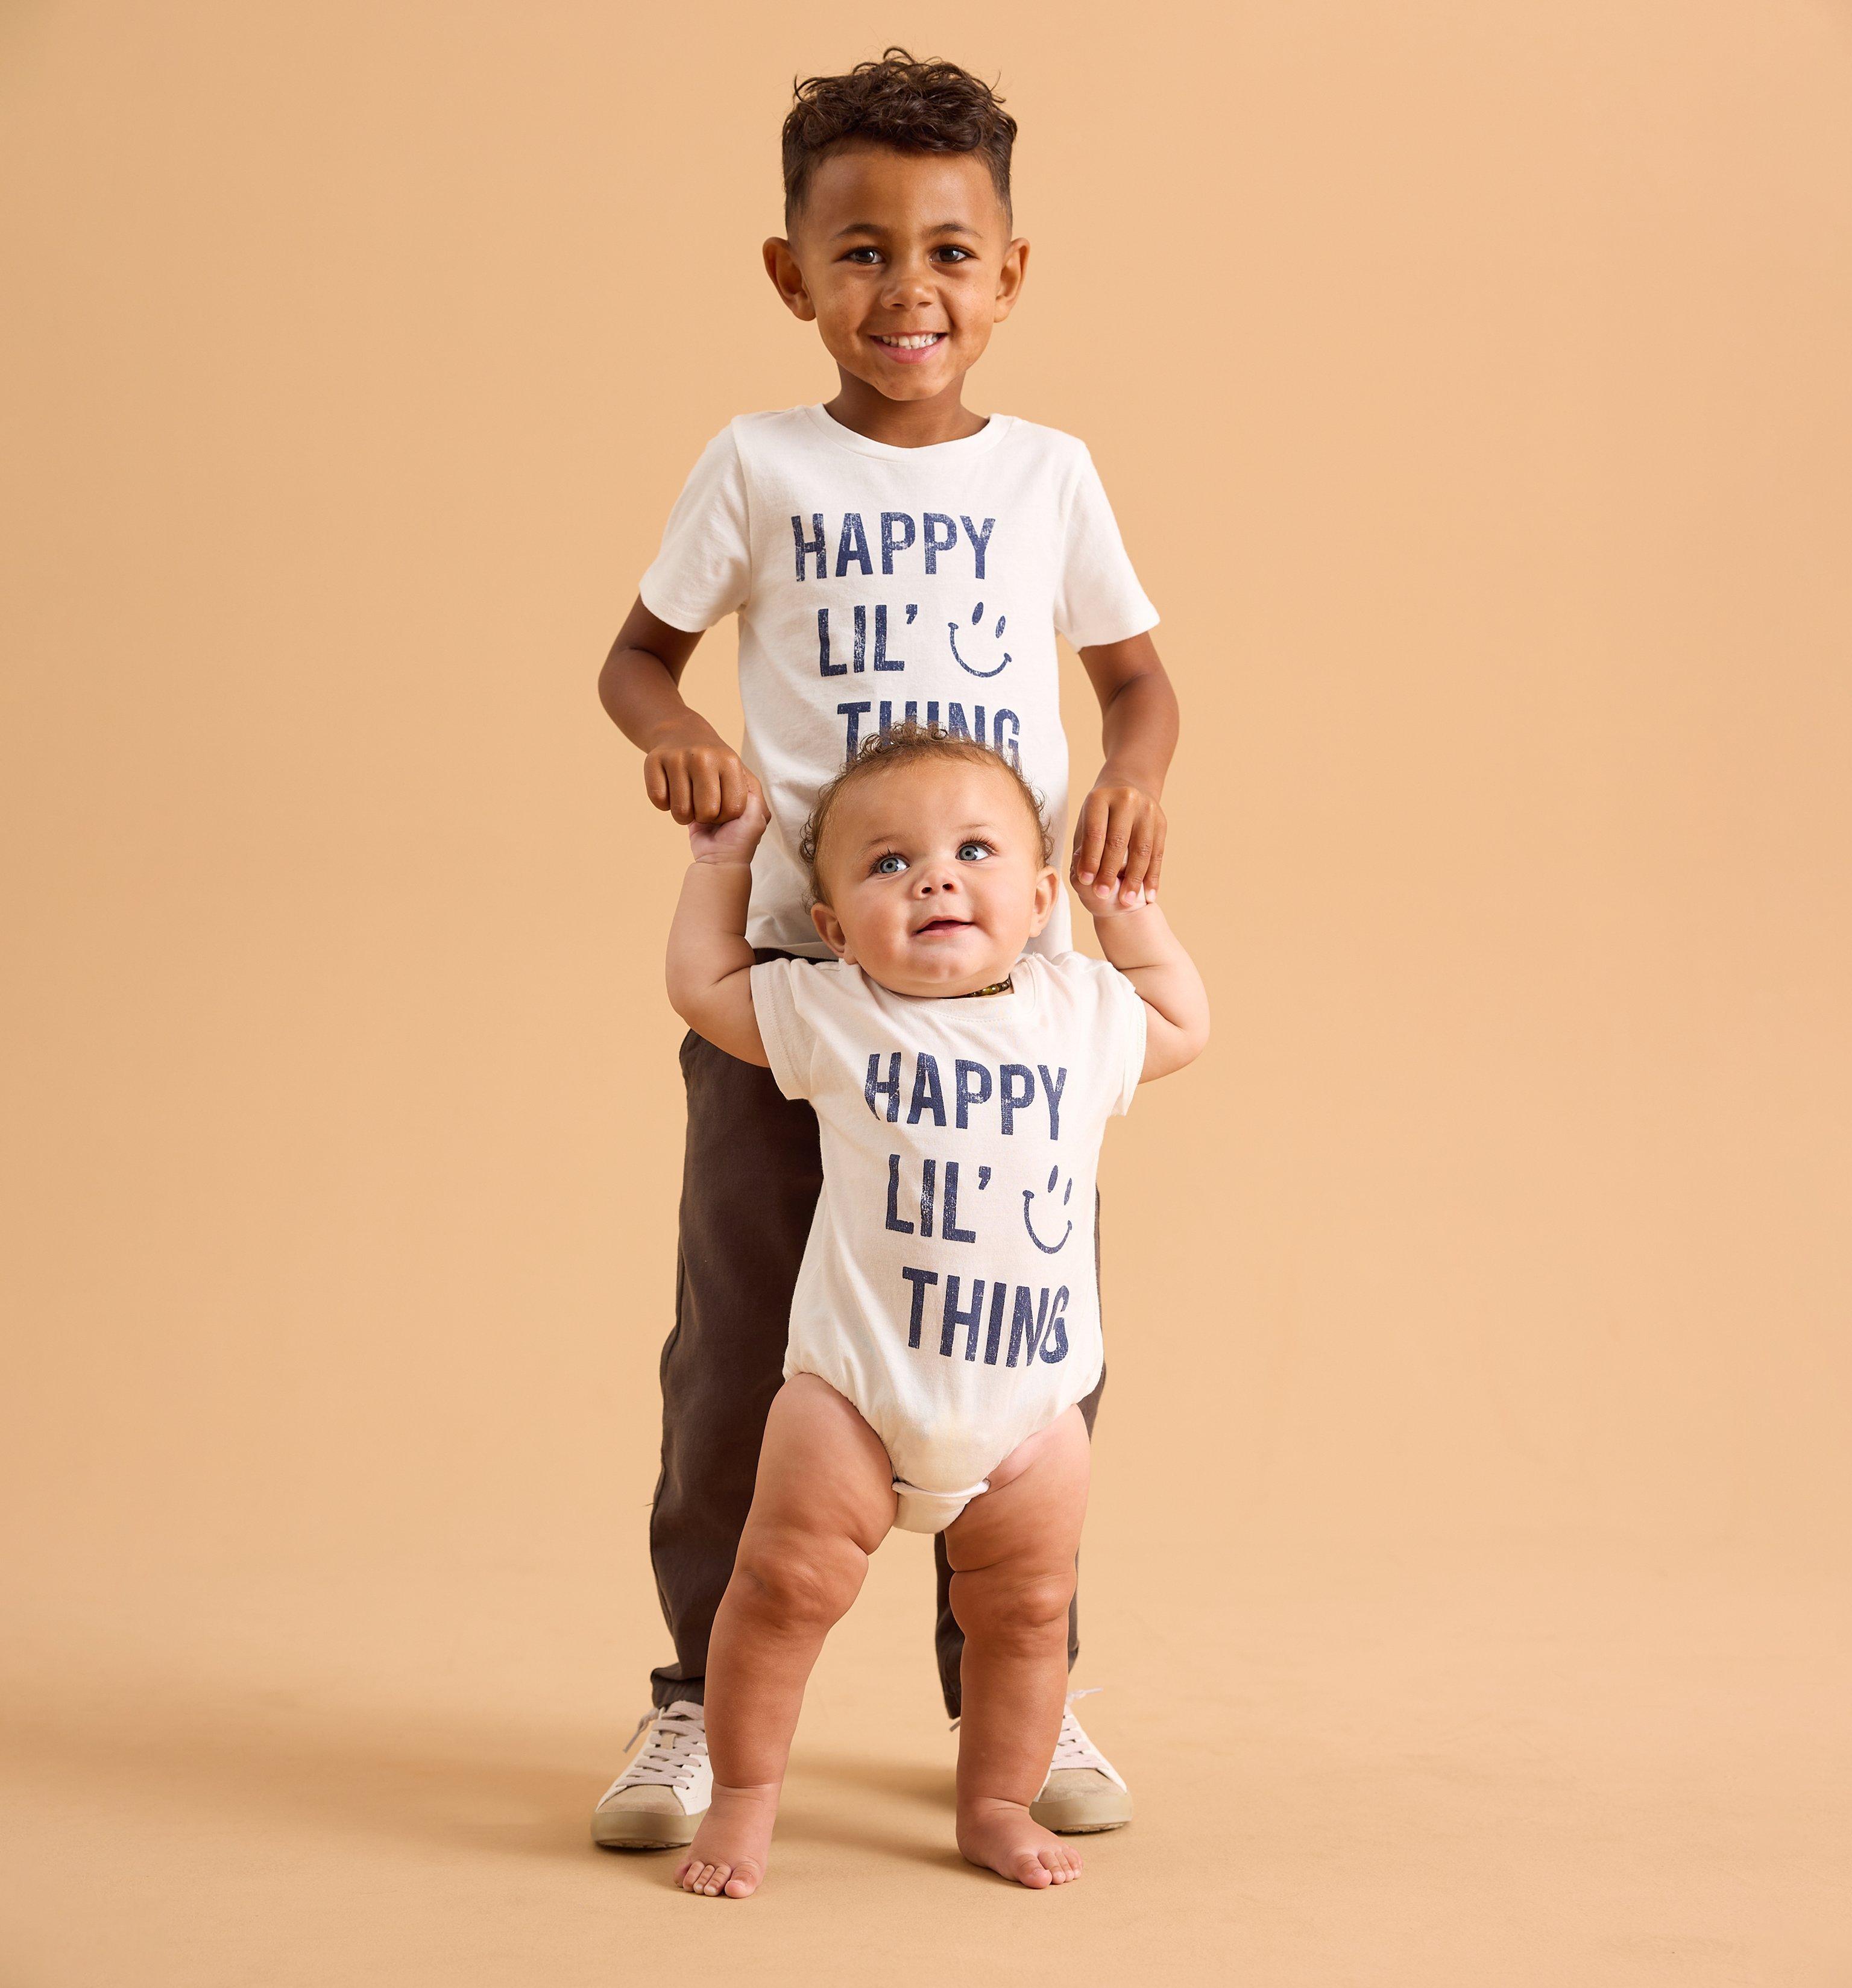 Young boy and baby wearing matching white and blue graphic tshirts.